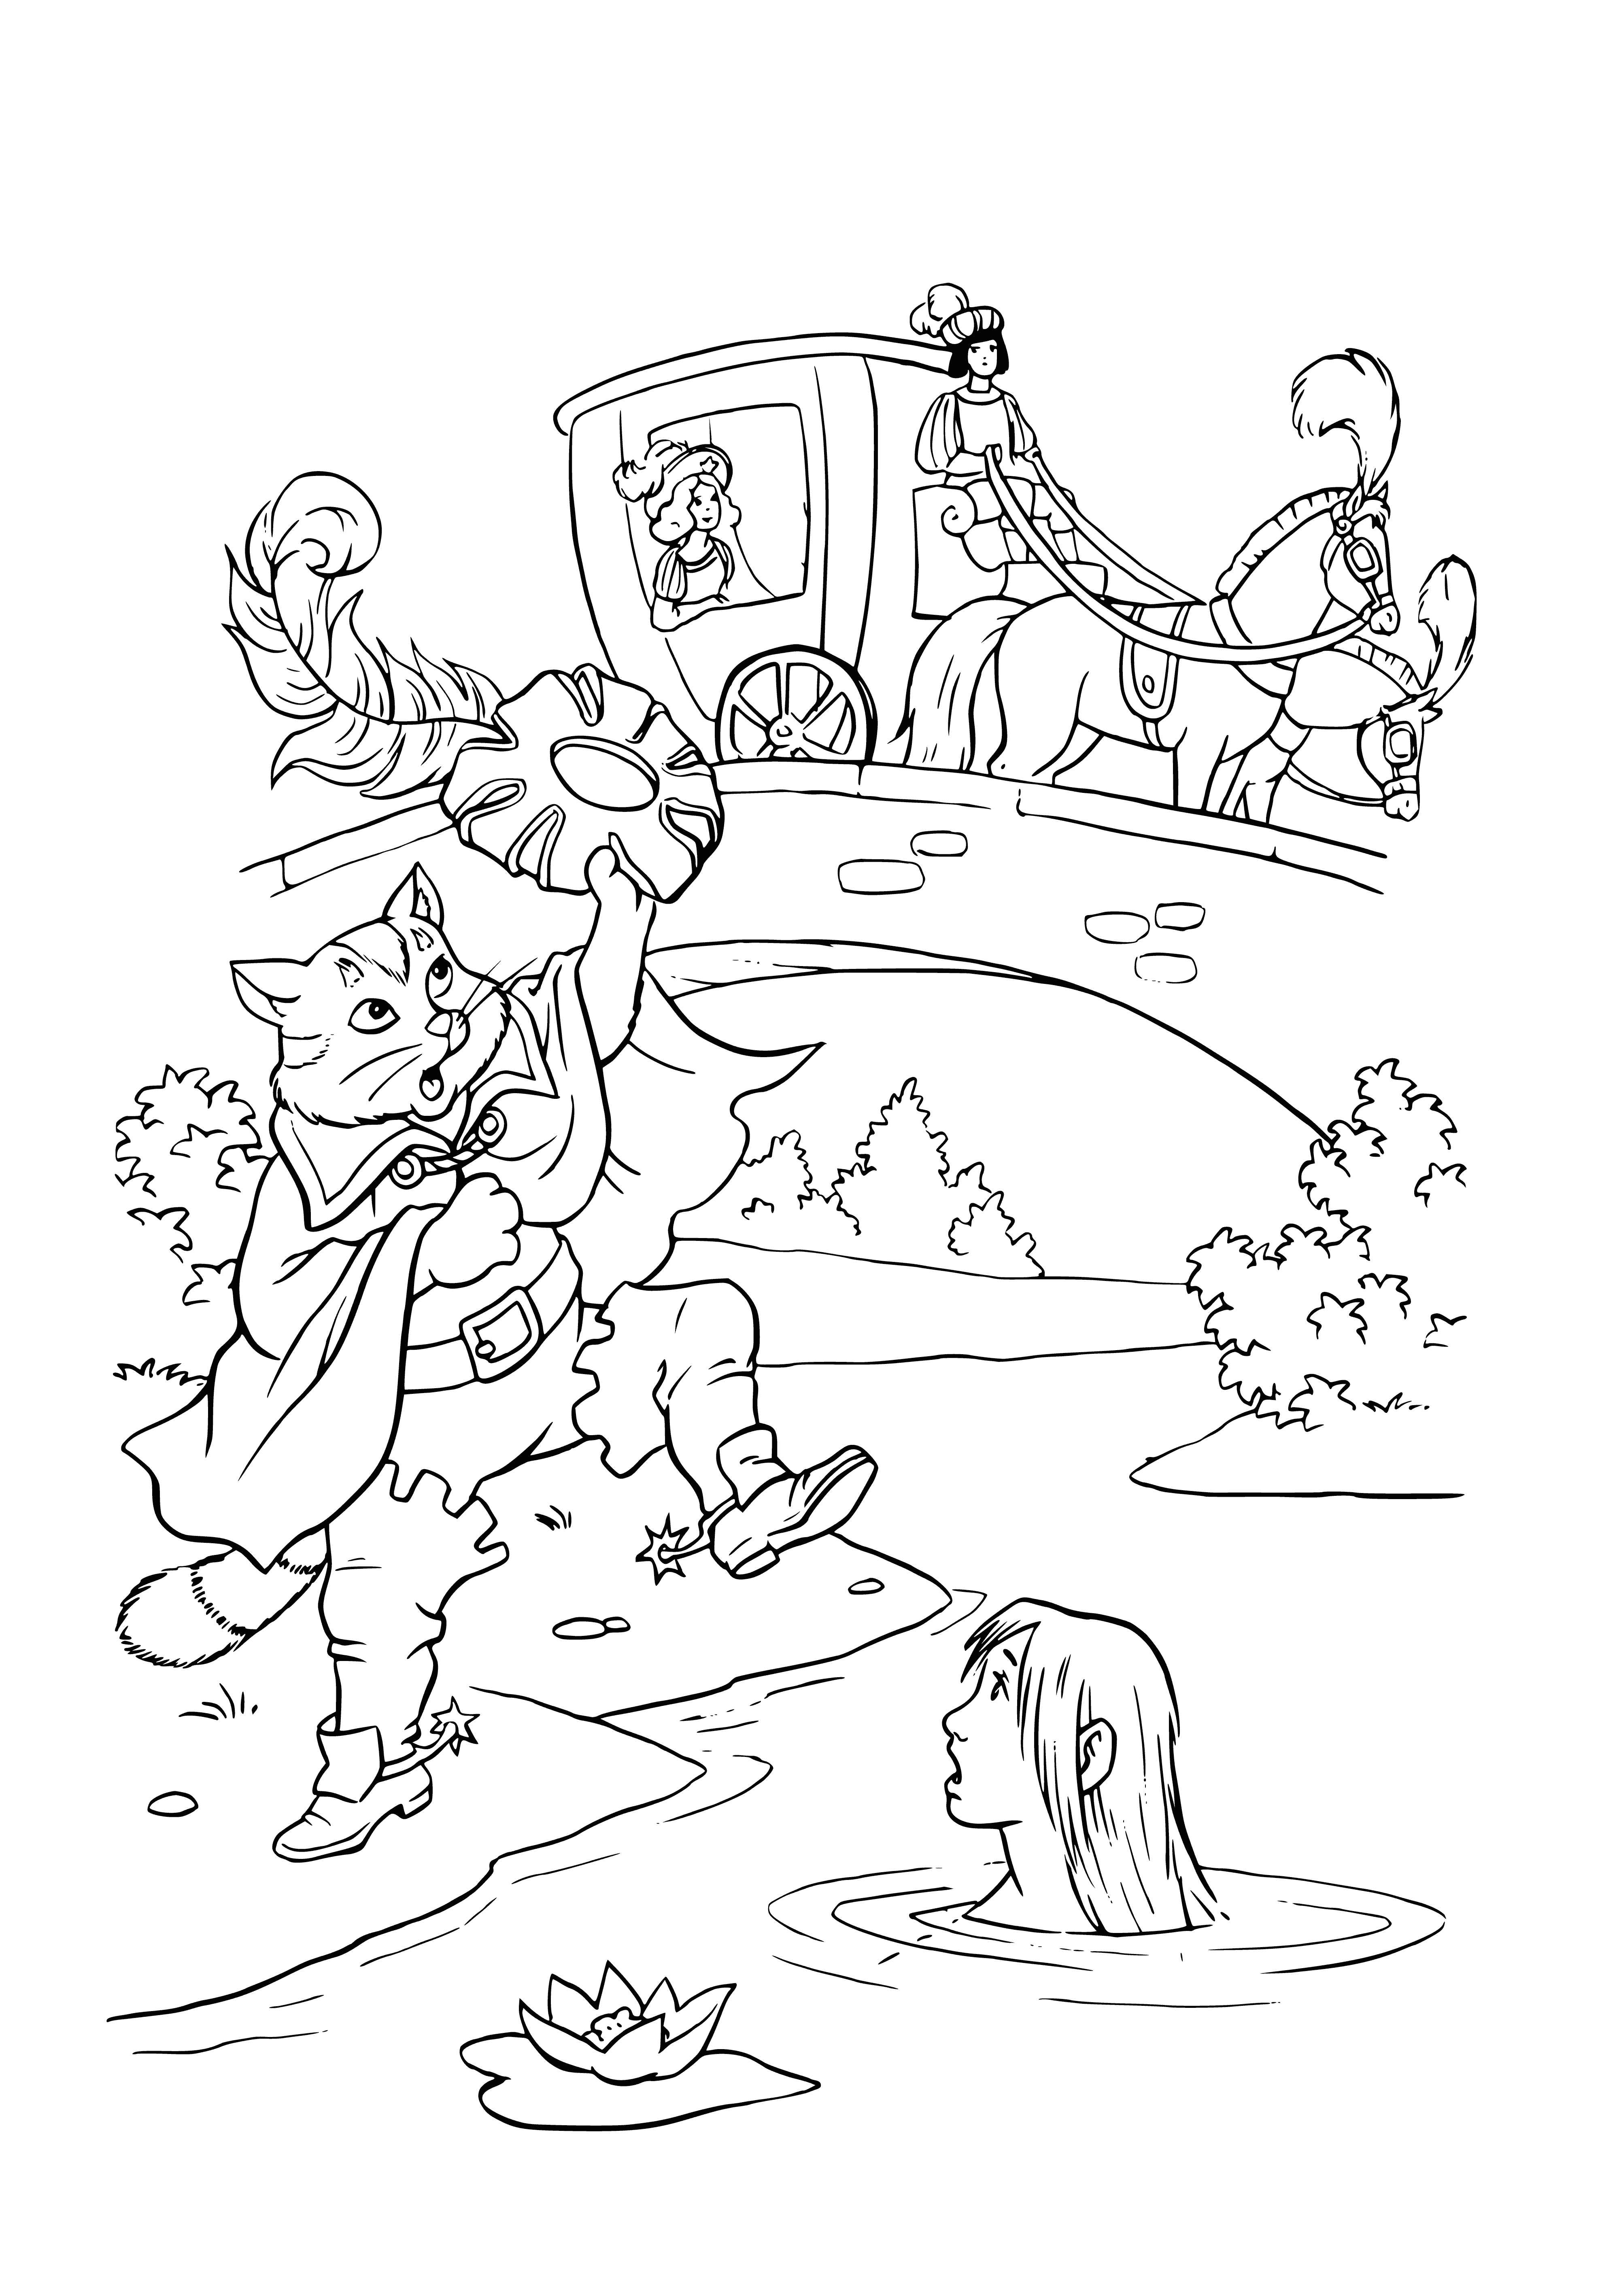 coloring page: Charles Perrault popularized many classic fairy tales that were edgier than today's. Tales includes "Little Red Riding Hood," "Cinderella," & "Bluebeard," & still captivate readers today.